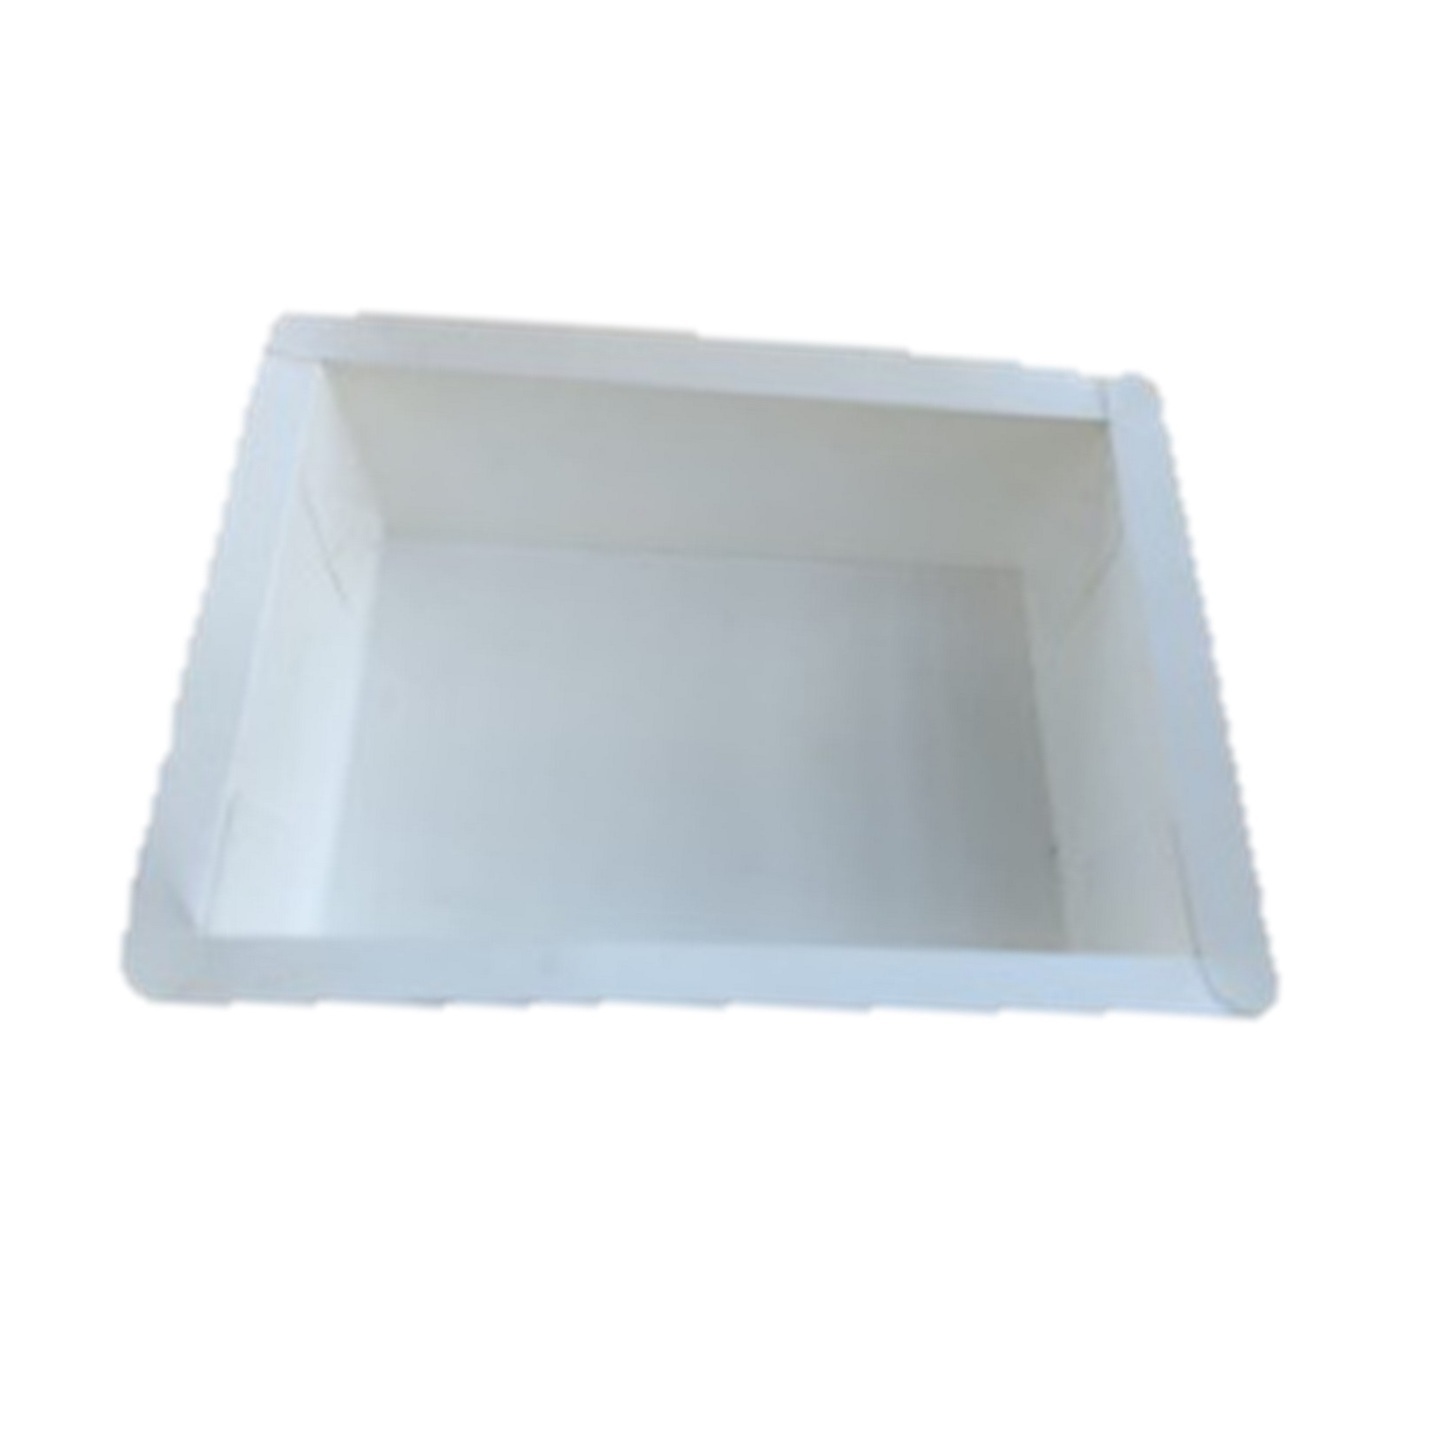 500ml Sealable Paper Food Tray